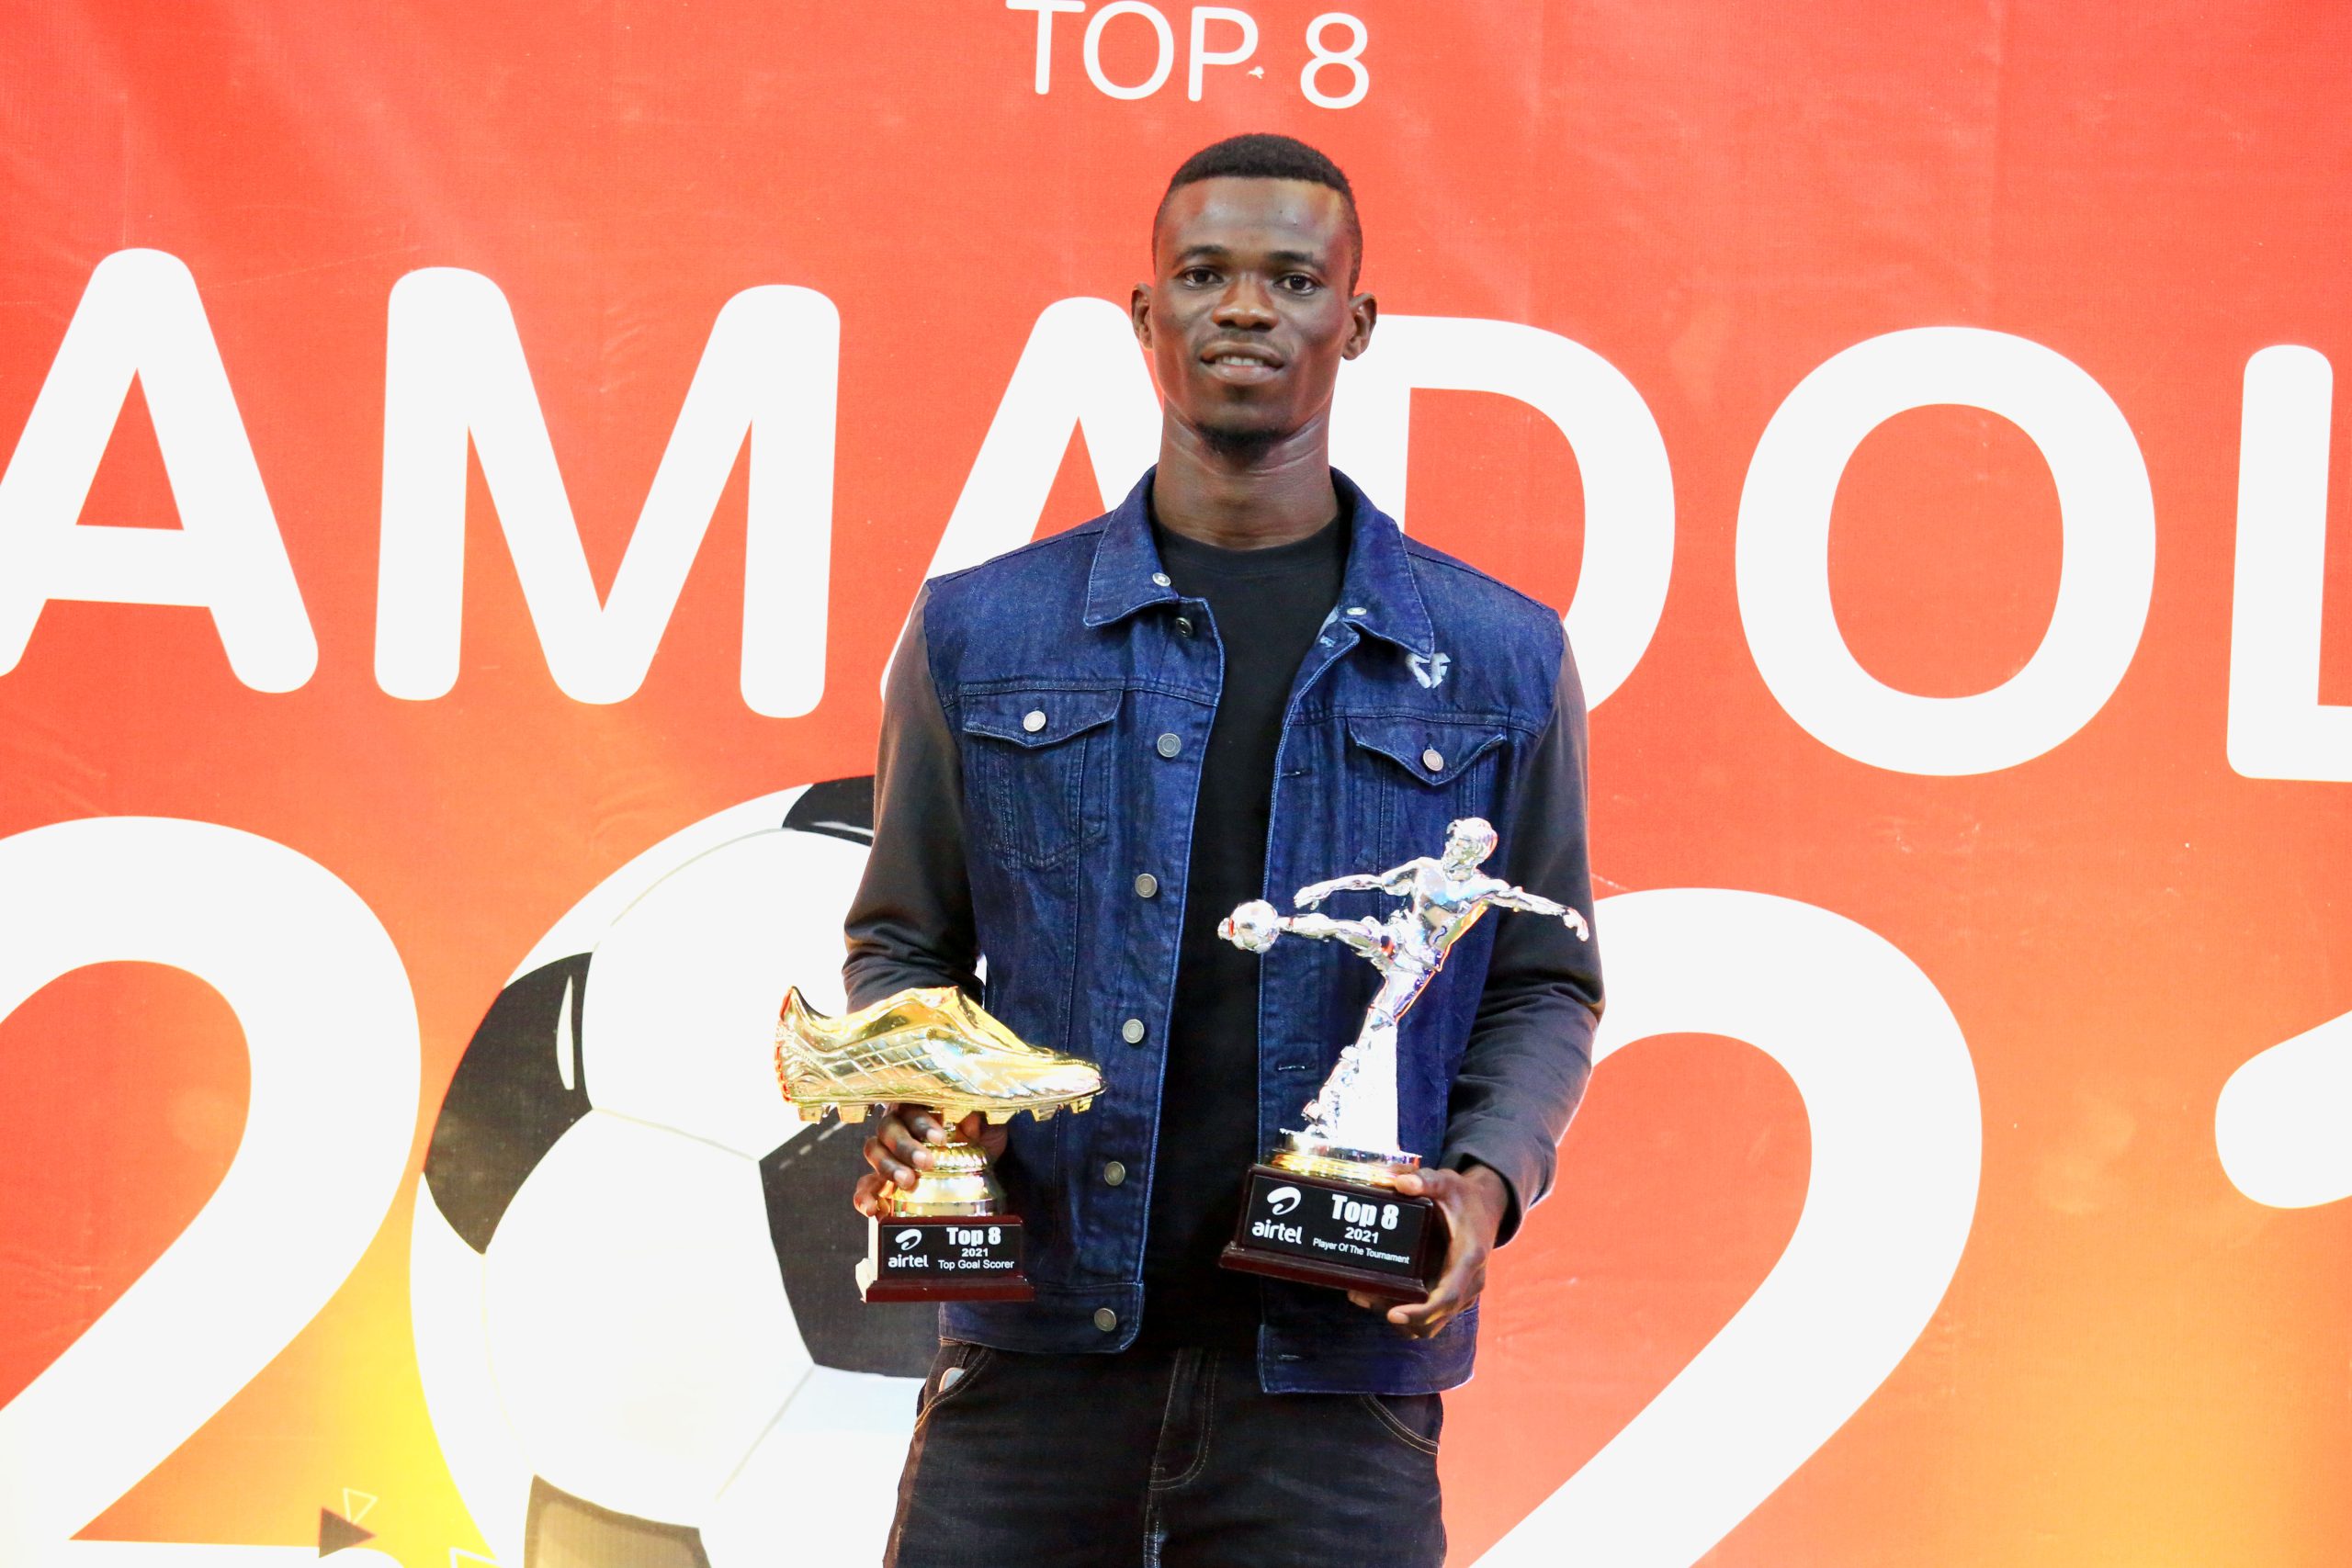 Airtel to celebrate Top 8 S5 achievers on Wed